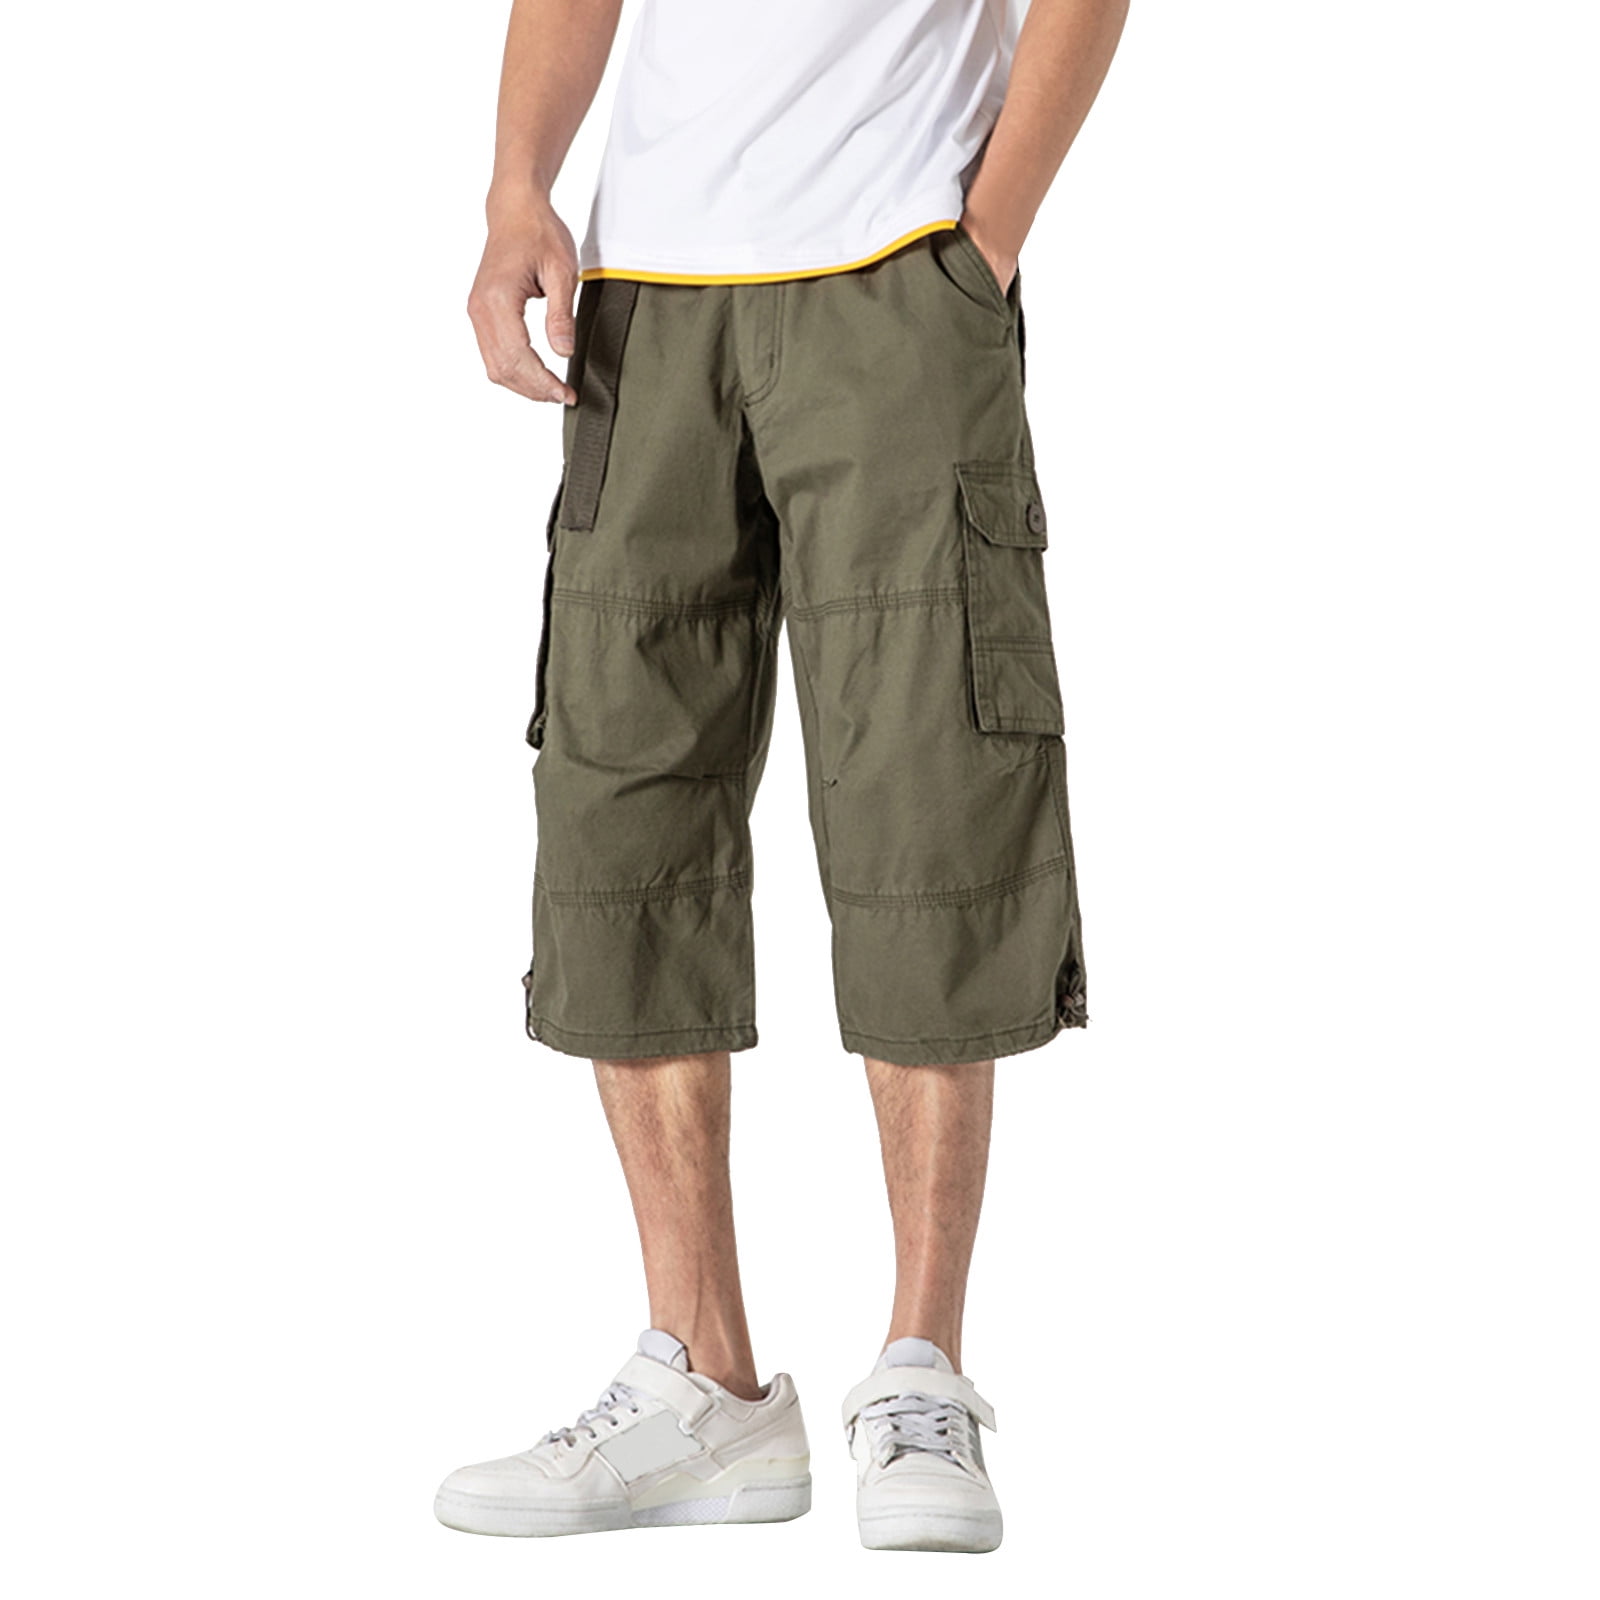 Plus Size Mens 3/4 Length Cargo Pants Shorts Baggy Casual Cotton Trousers  Solid | eBay